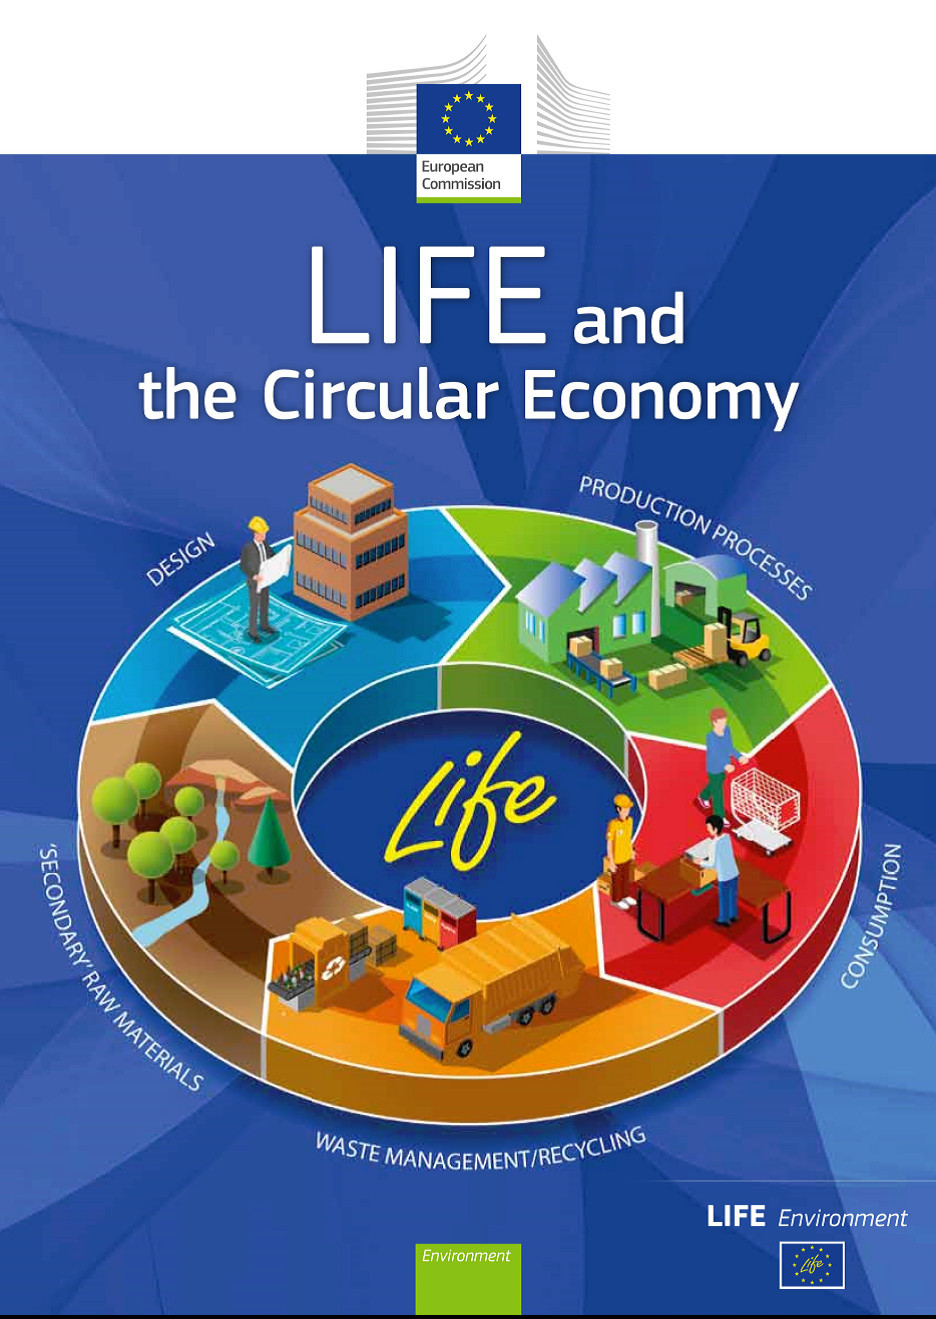 THE GREEN SINKS PROJECT IN THE EUROPEAN PUBLICATION "LIFE AND THE CIRCULAR ECONOMY" 1